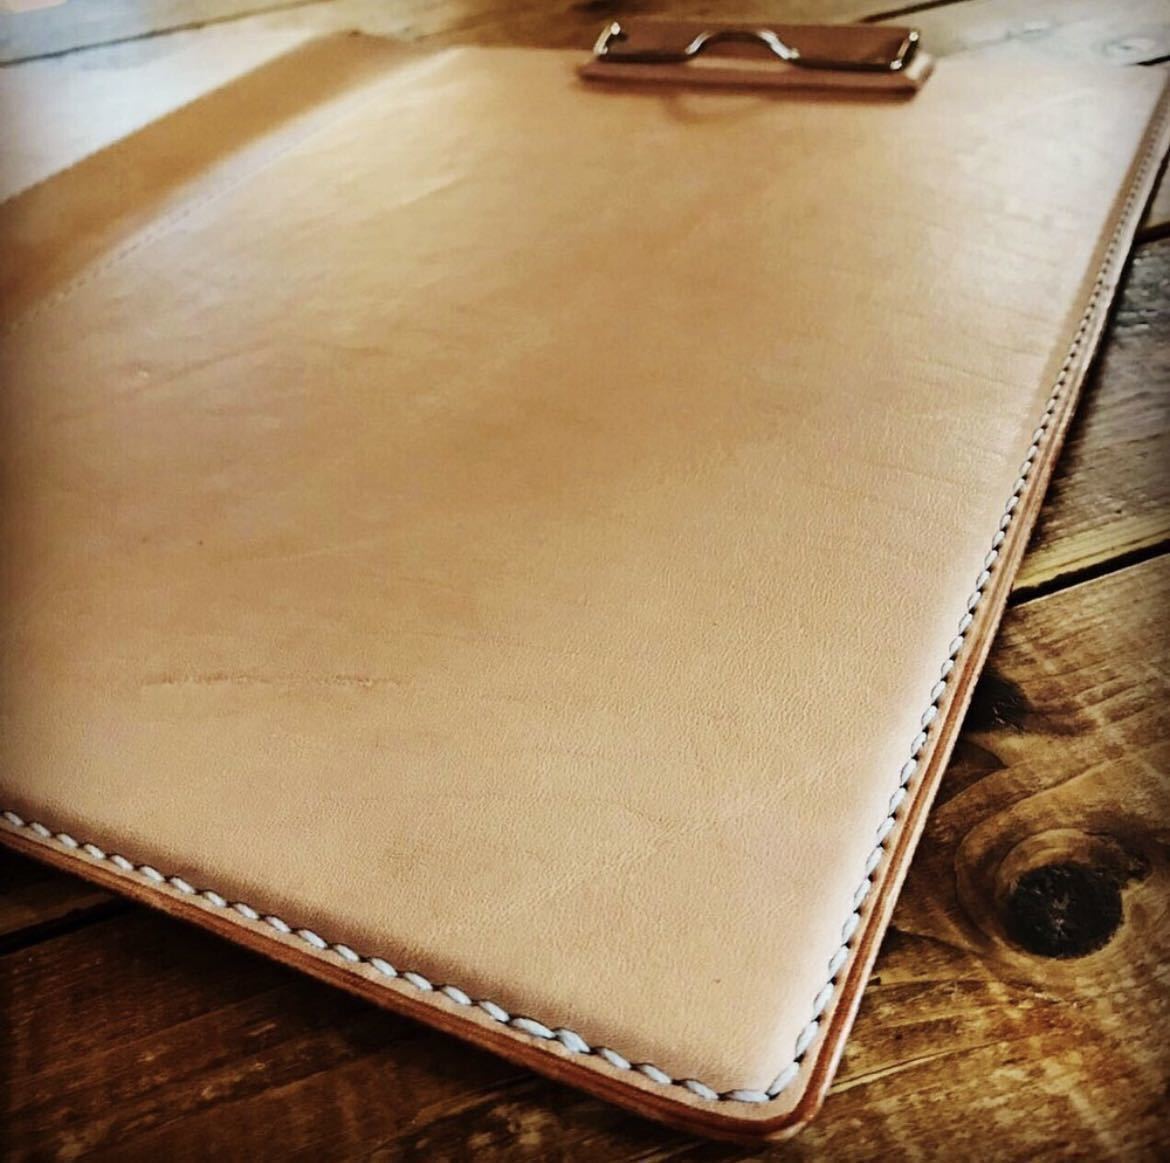  hand made Tochigi leather clip file binder - cow leather total hand .. leather leather cover case 